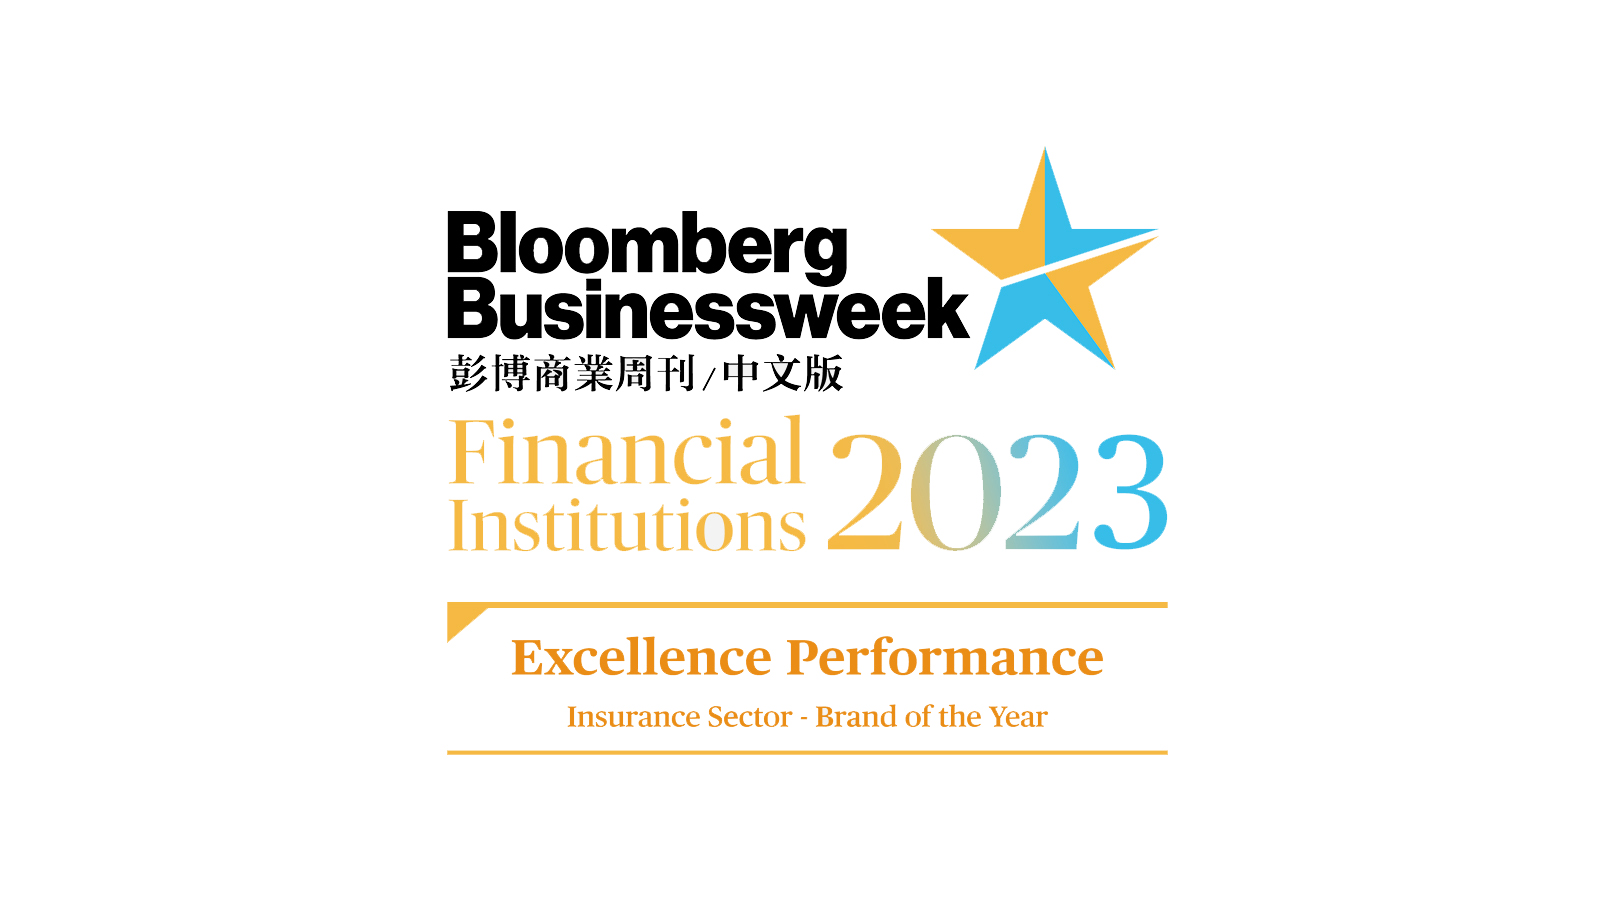 Bloomberg Businessweek Financial Institution Awards 2021 - Excellence Performance - Insurance -Brand of the Year